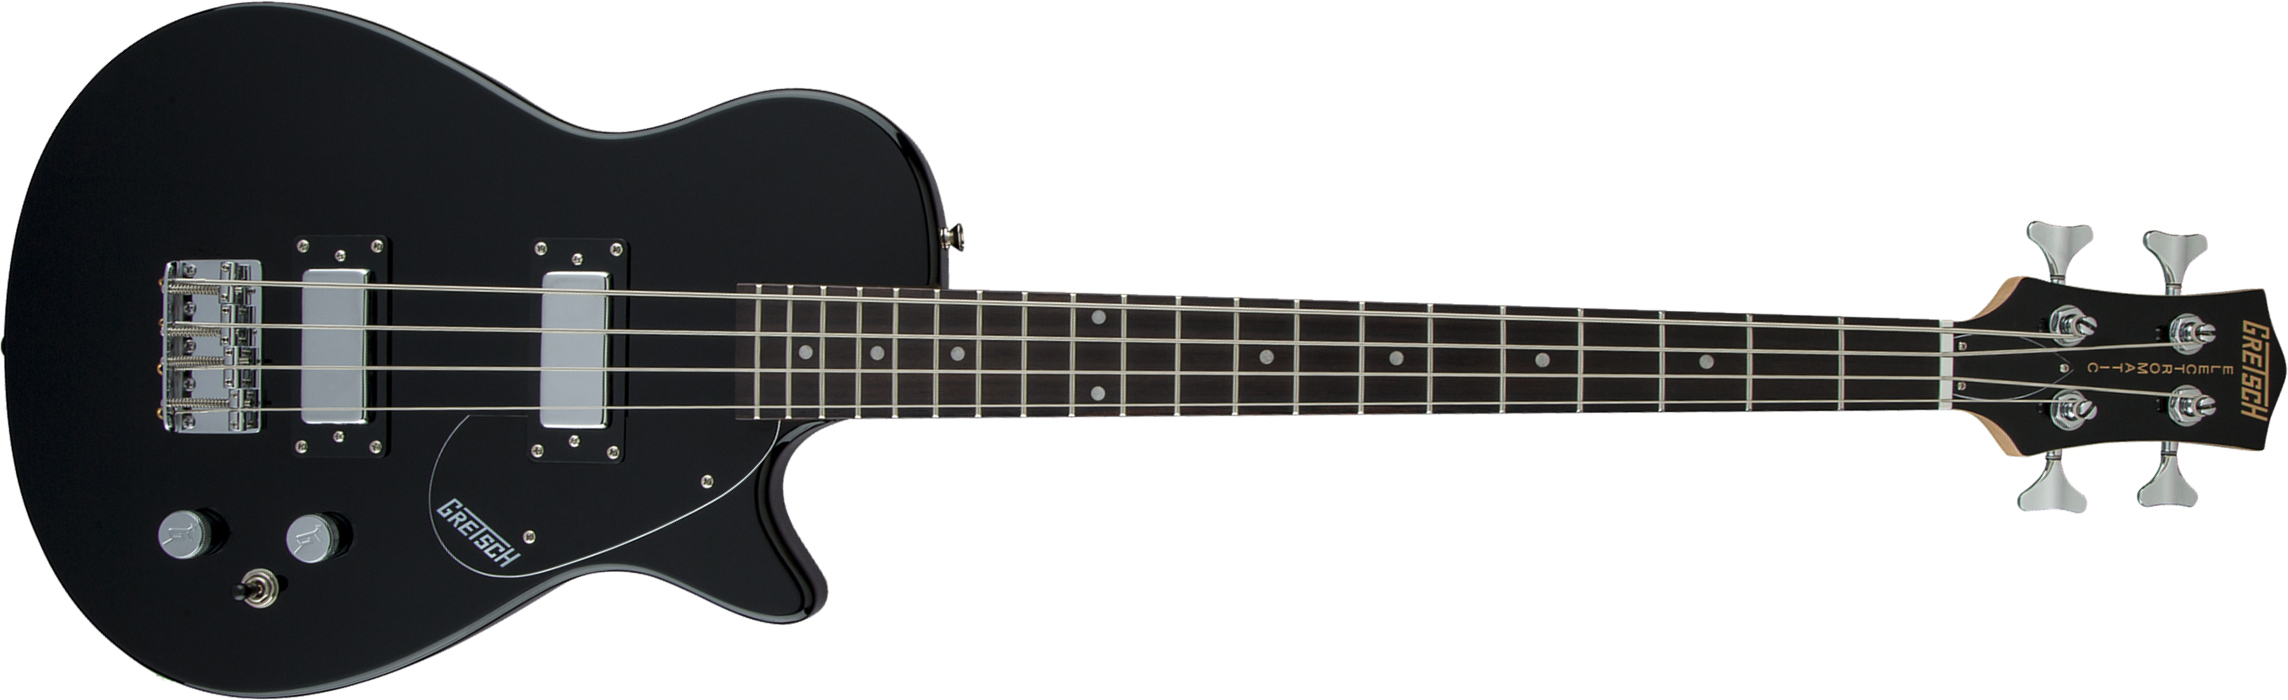 Gretsch G2220 Electromatic Junior Jet Bass Ii Short-scale 2019 Hh Wal - Black - Solid body elektrische bas - Main picture